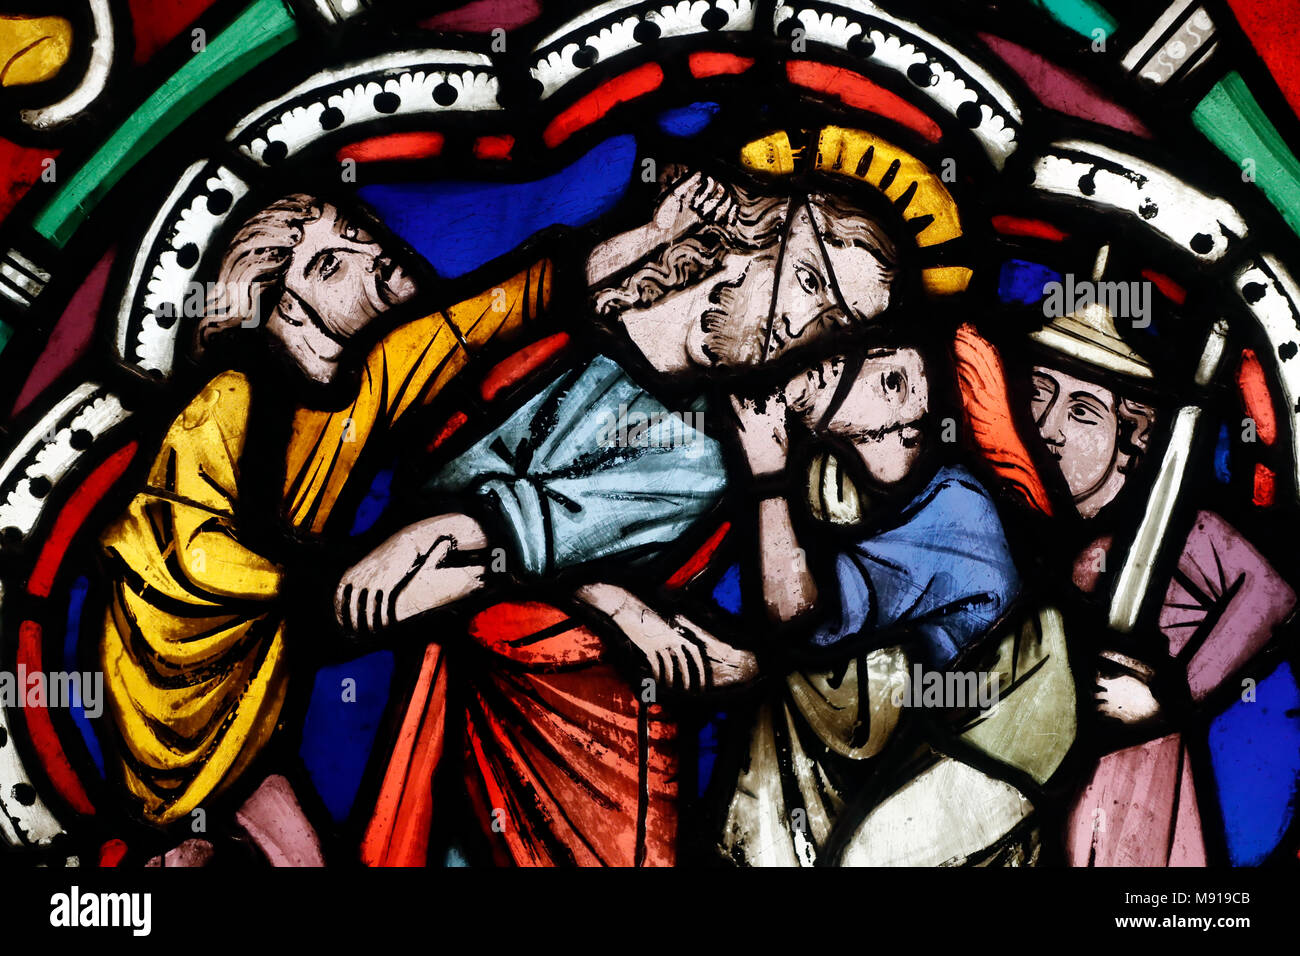 Oeuvre Notre-Dame Museum.  Stained glass window. The kiss of Judas. St Thomas church. 13 th century.  Strasbourg. France. Stock Photo